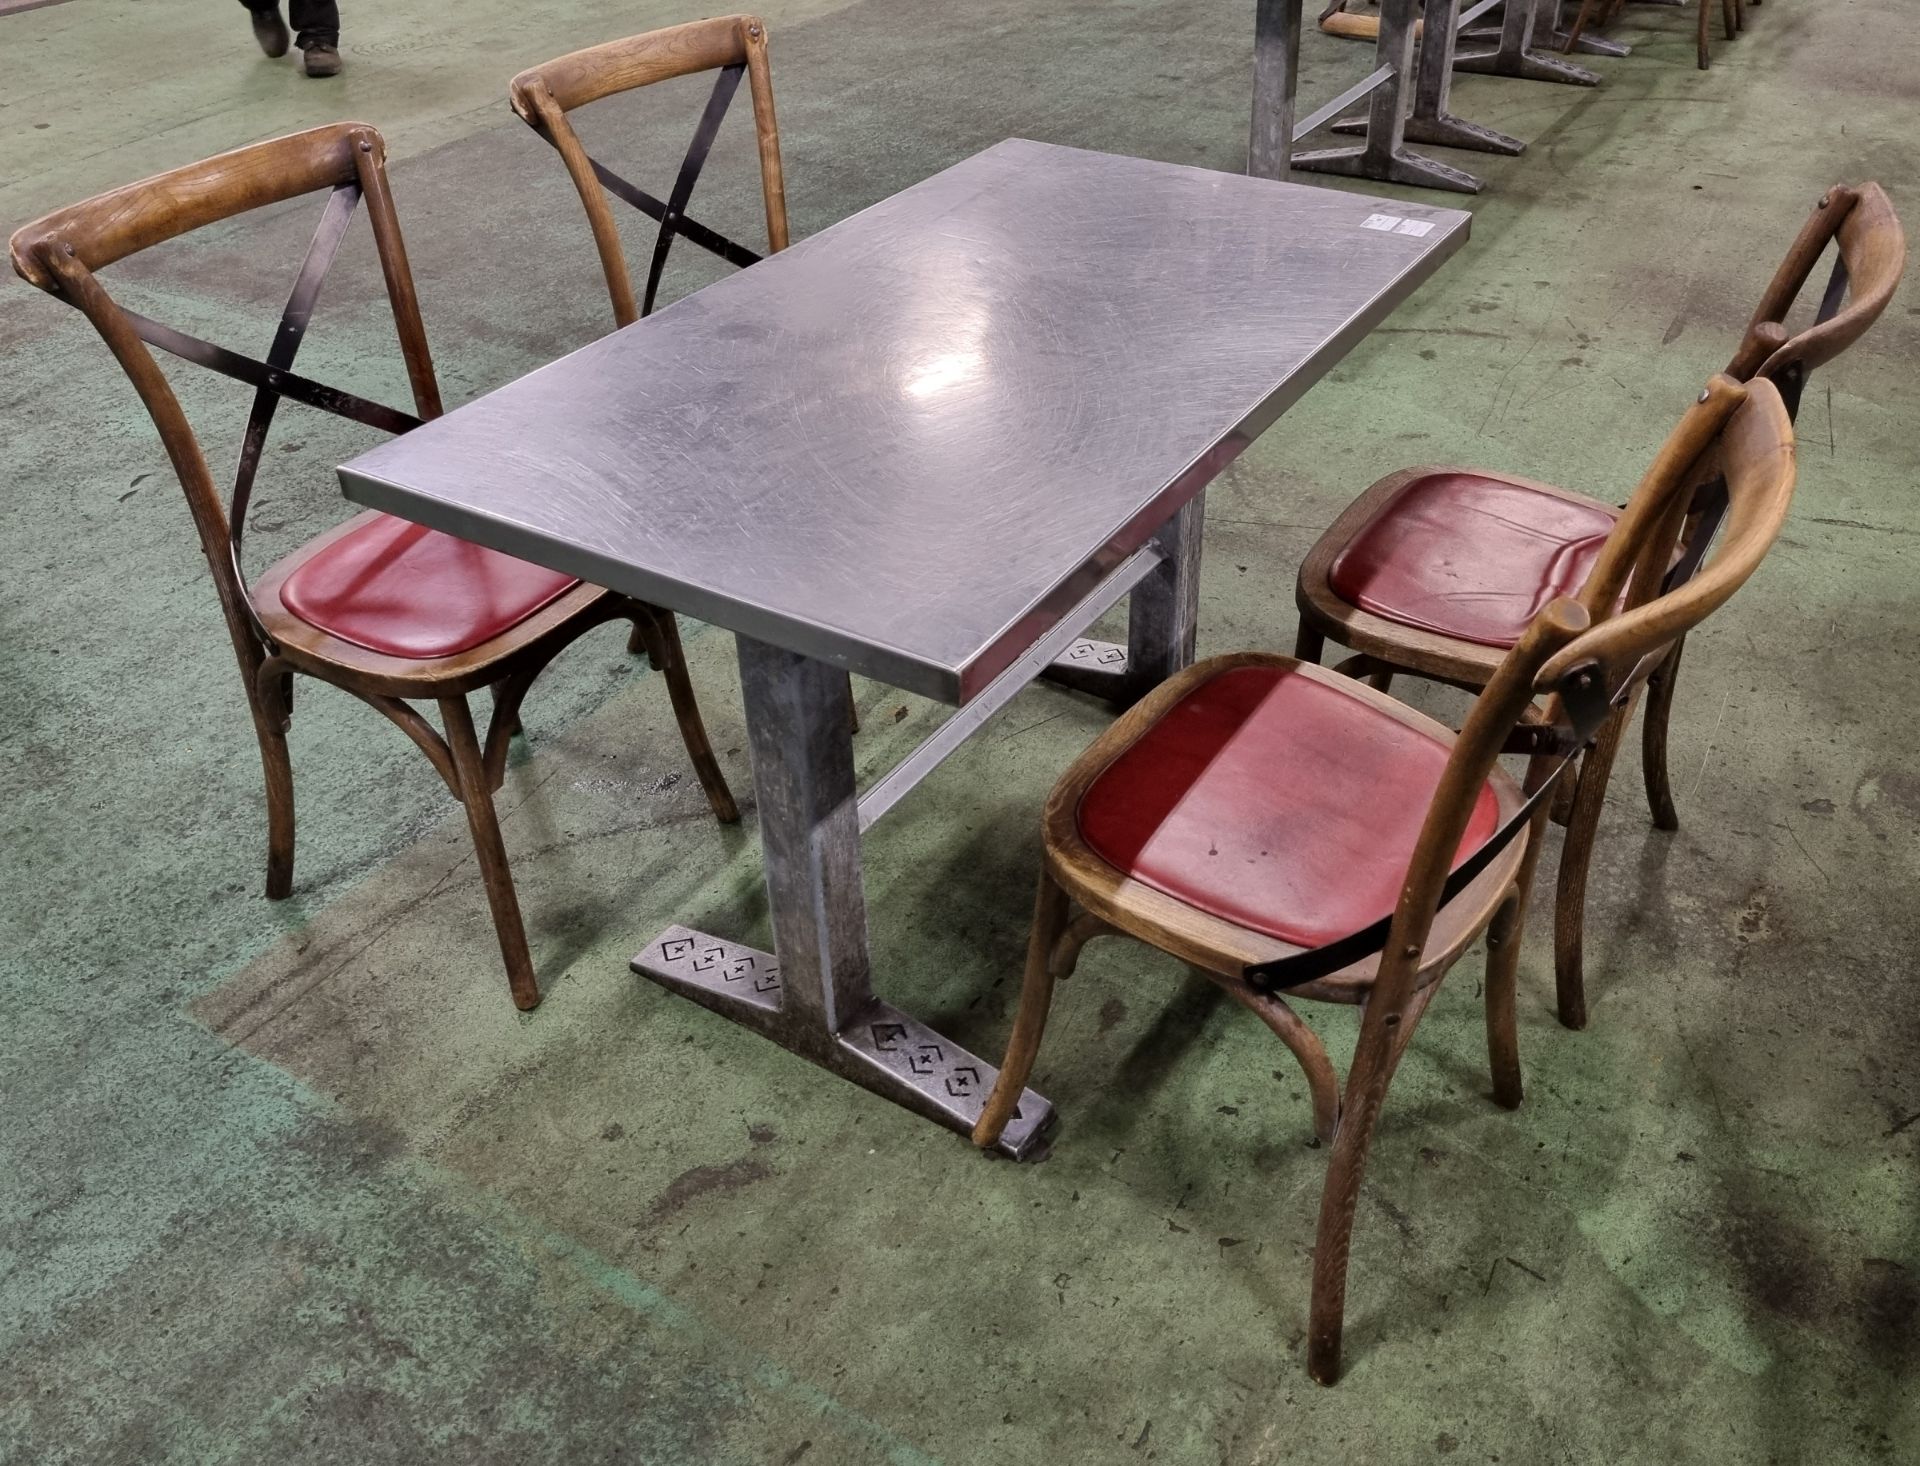 4x Wooden restaurant chairs, Metal table - W 1200 x D 690 x H 760 mm - Image 4 of 5